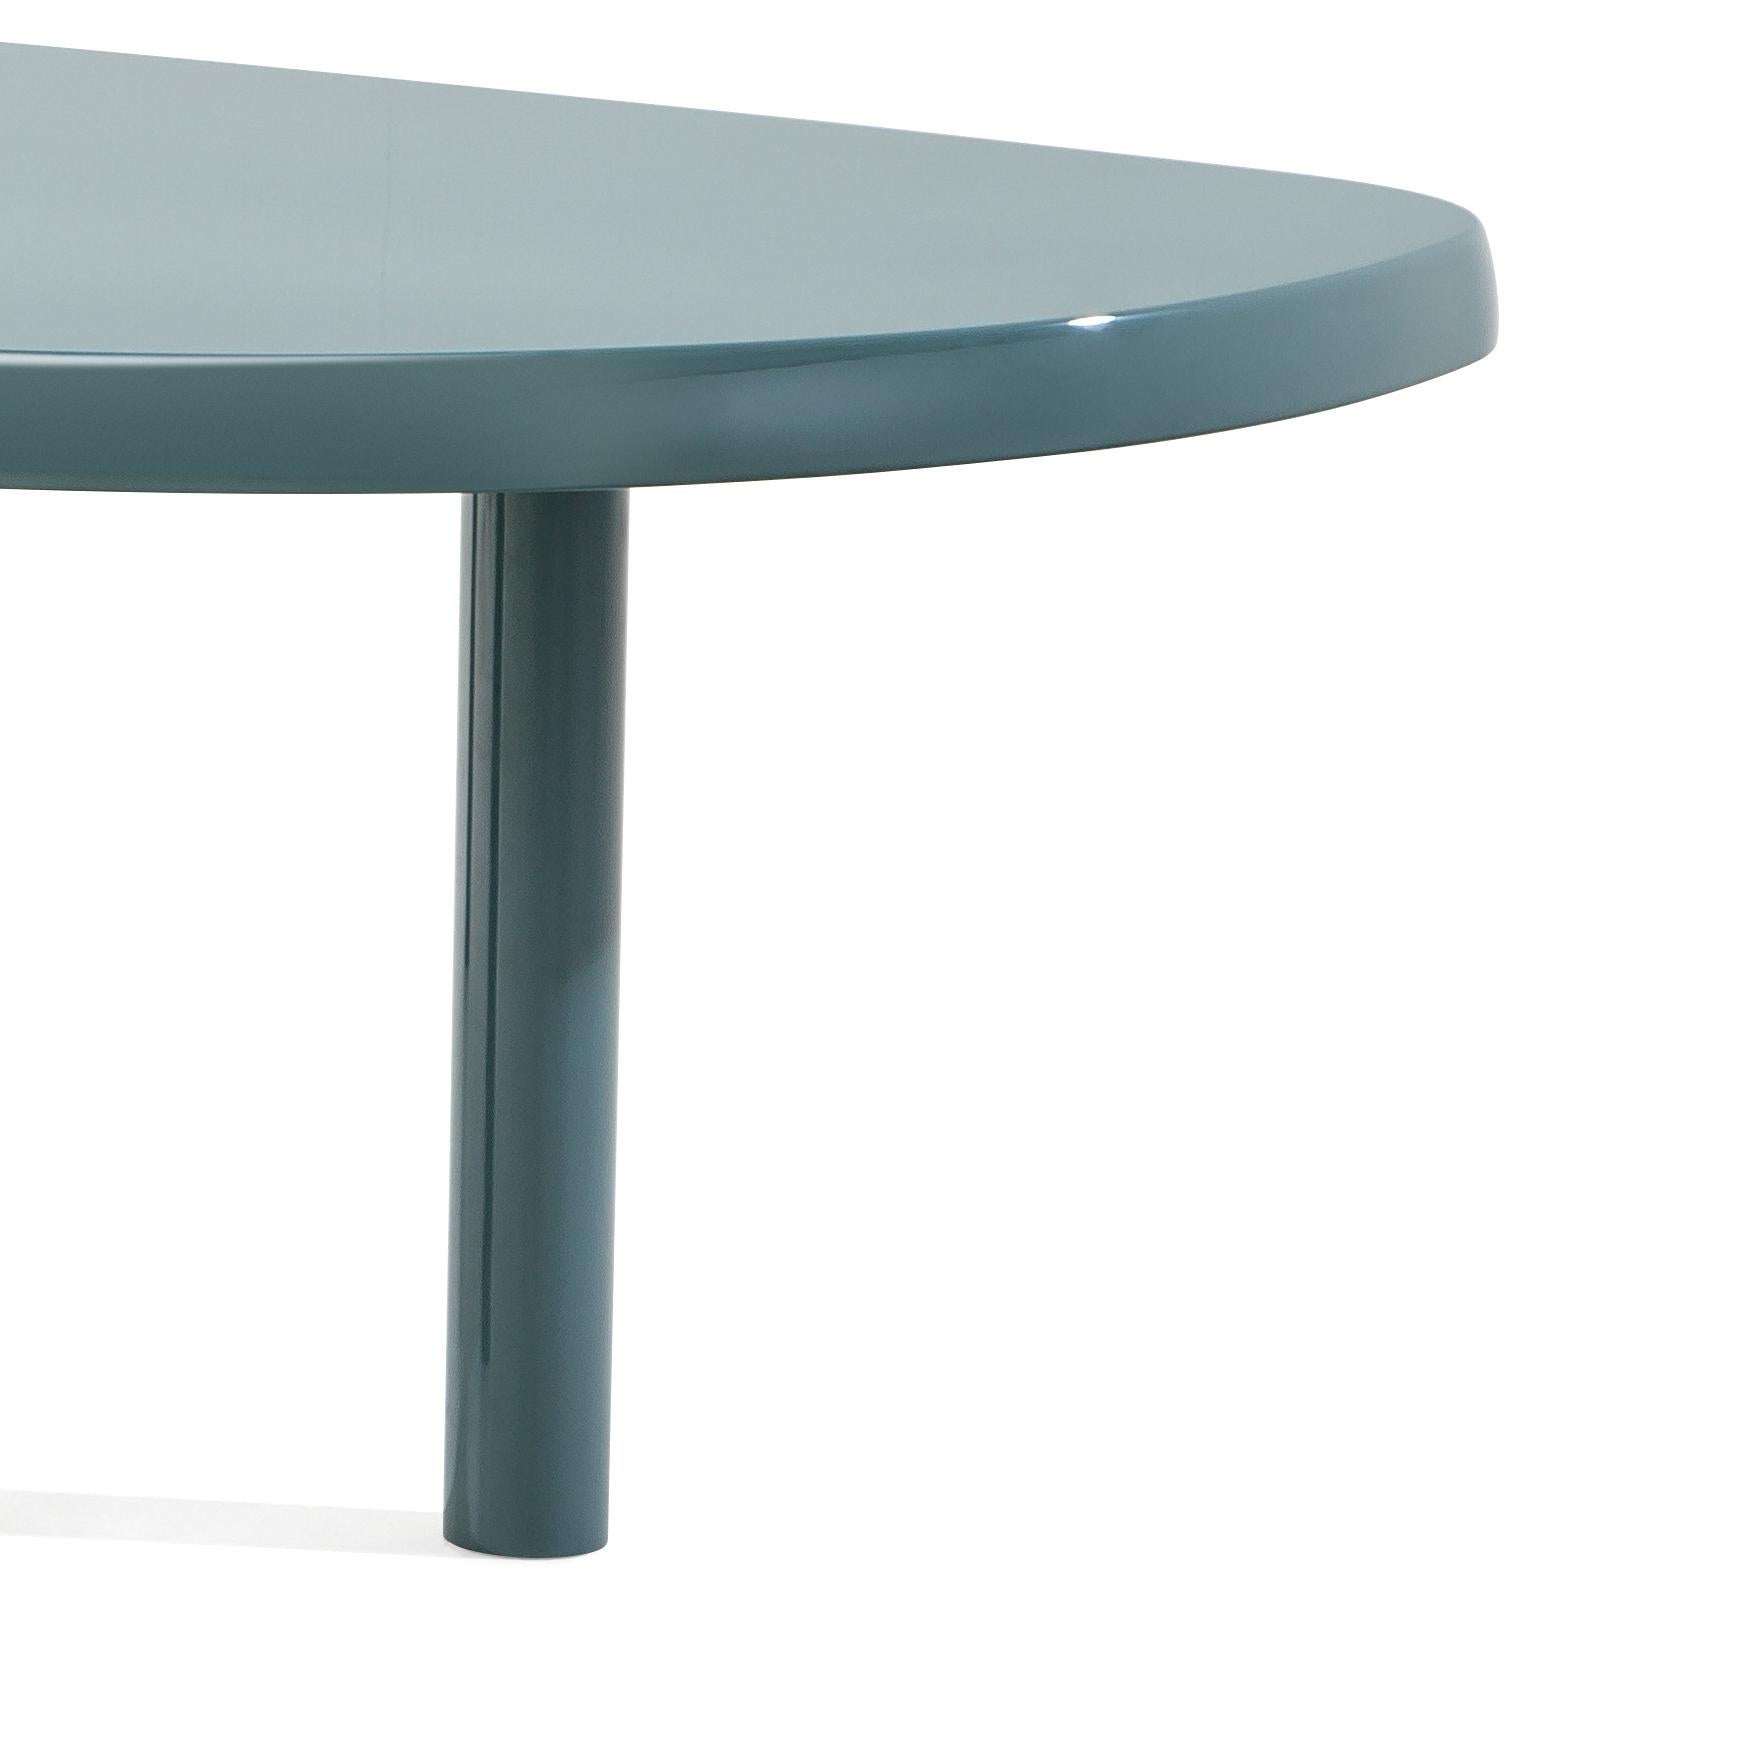 Italian Charlotte Perriand Table En Forme Libre, Sage Green Lacquered Wood by Cassina